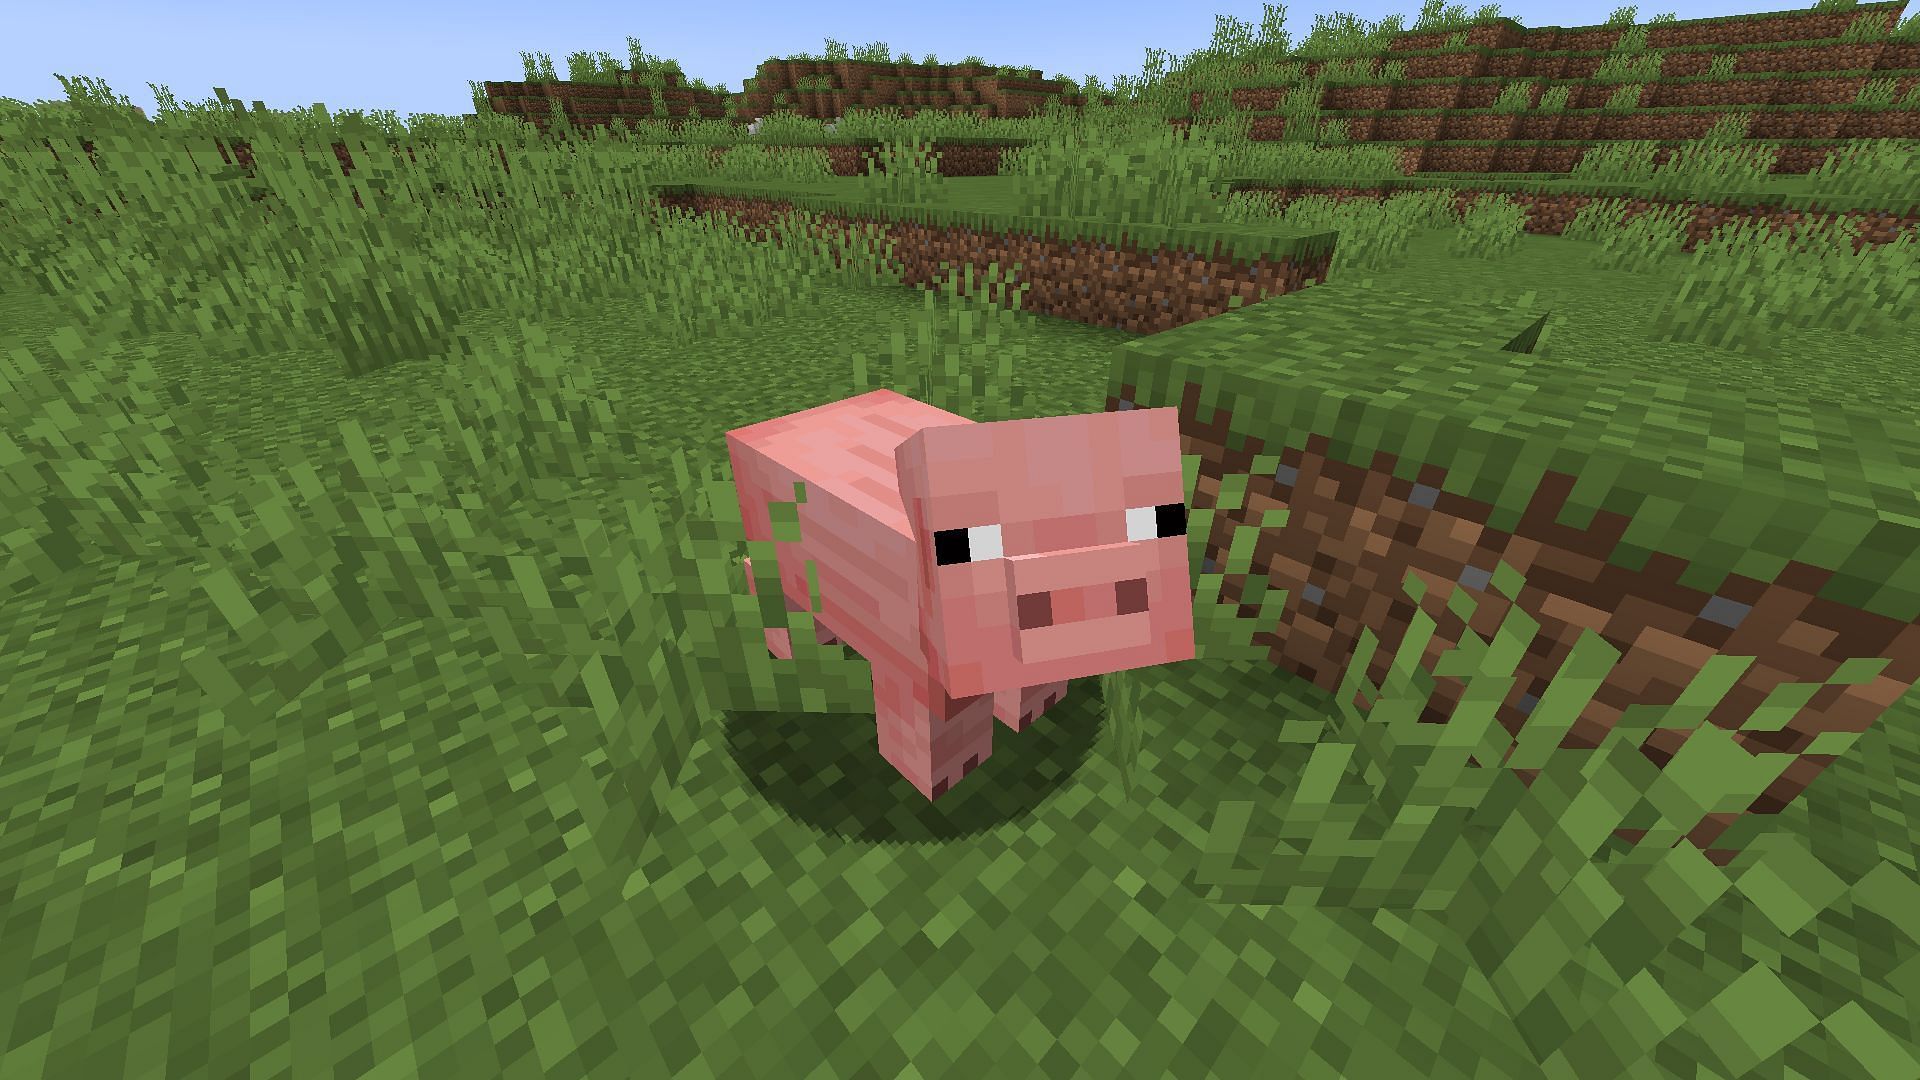 Pigs are most commonly found in plains biomes (Image via Minecraft 1.19 update)